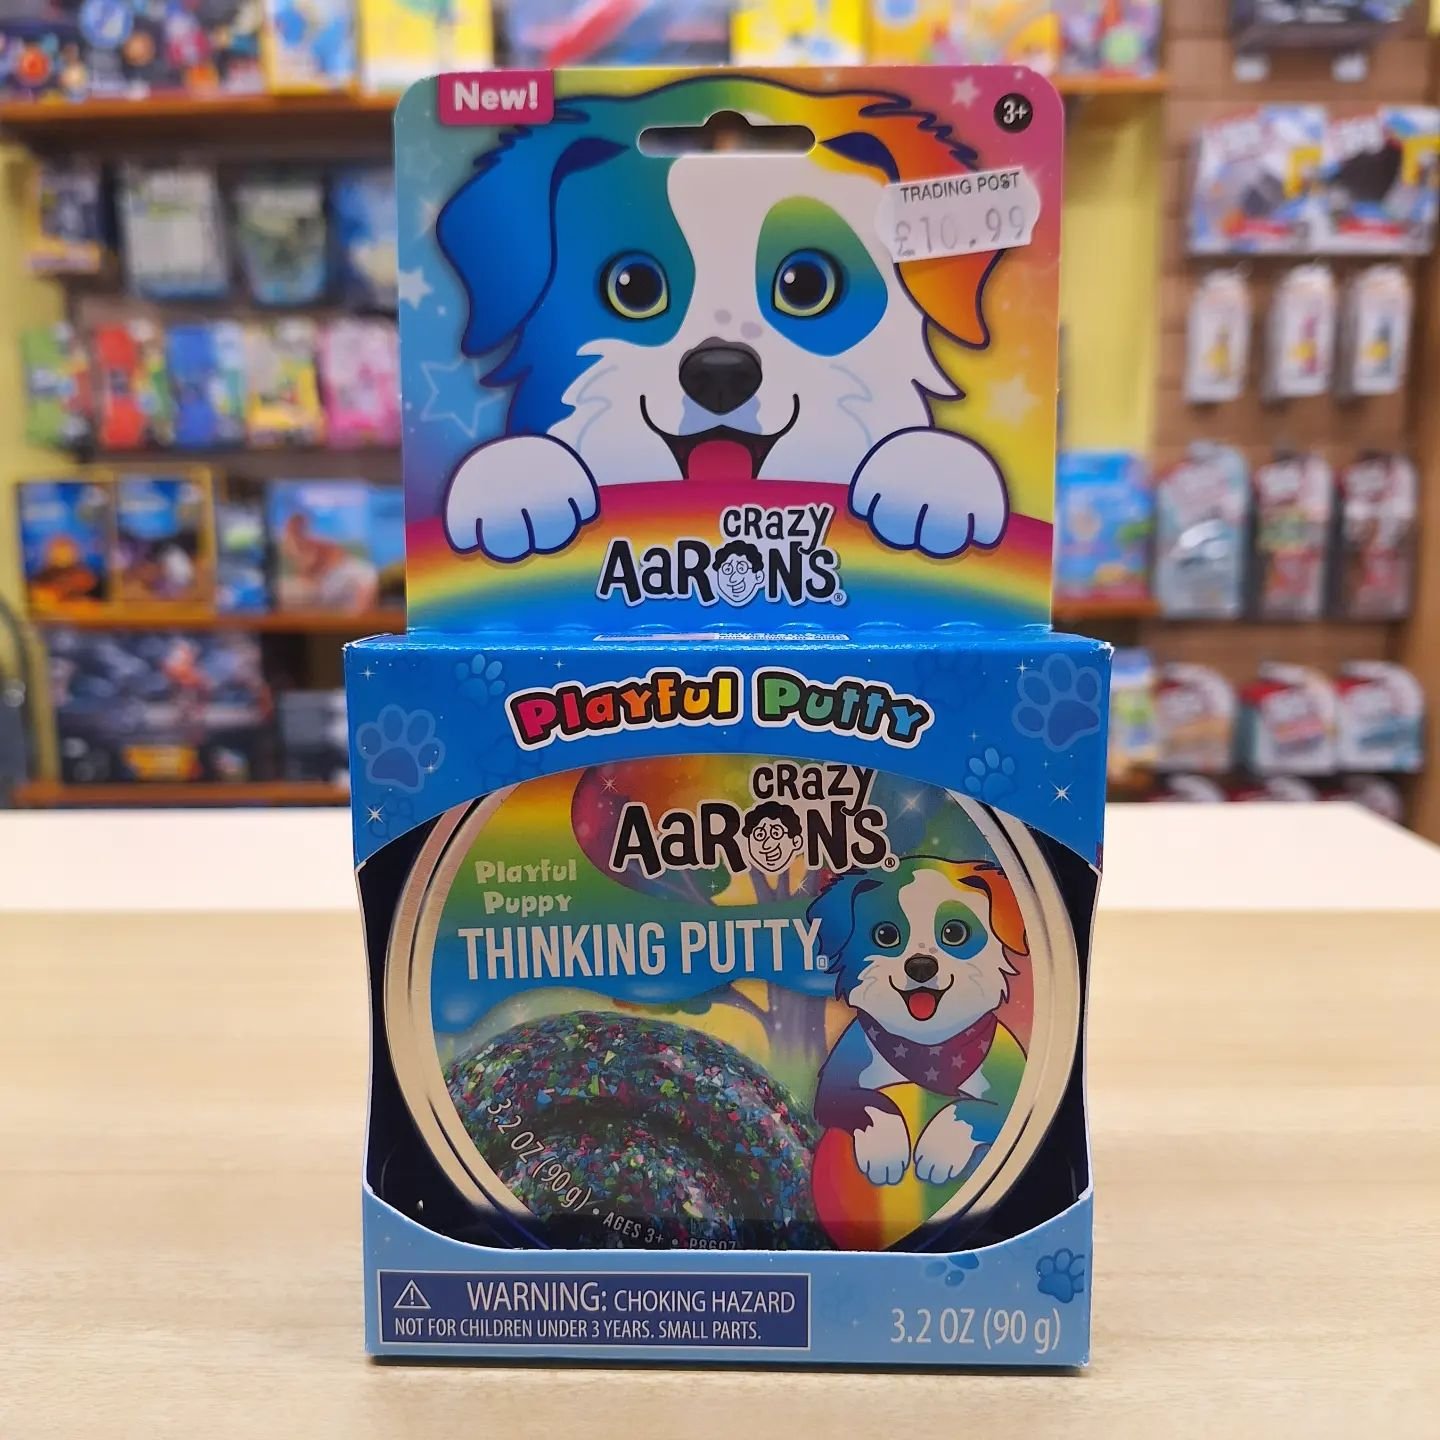 🌟NEW🌟

Crazy Aaron's Thinking Putty, 4 brand new themes to choose from!

Pop in a see our full range of CRAZY AARON'S THINKING PUTTY, starting at just &pound;3.99!

⚠️Did you know our THINKING PUTTY is the same price as SYMTHS SUPERSTORES, Plus man